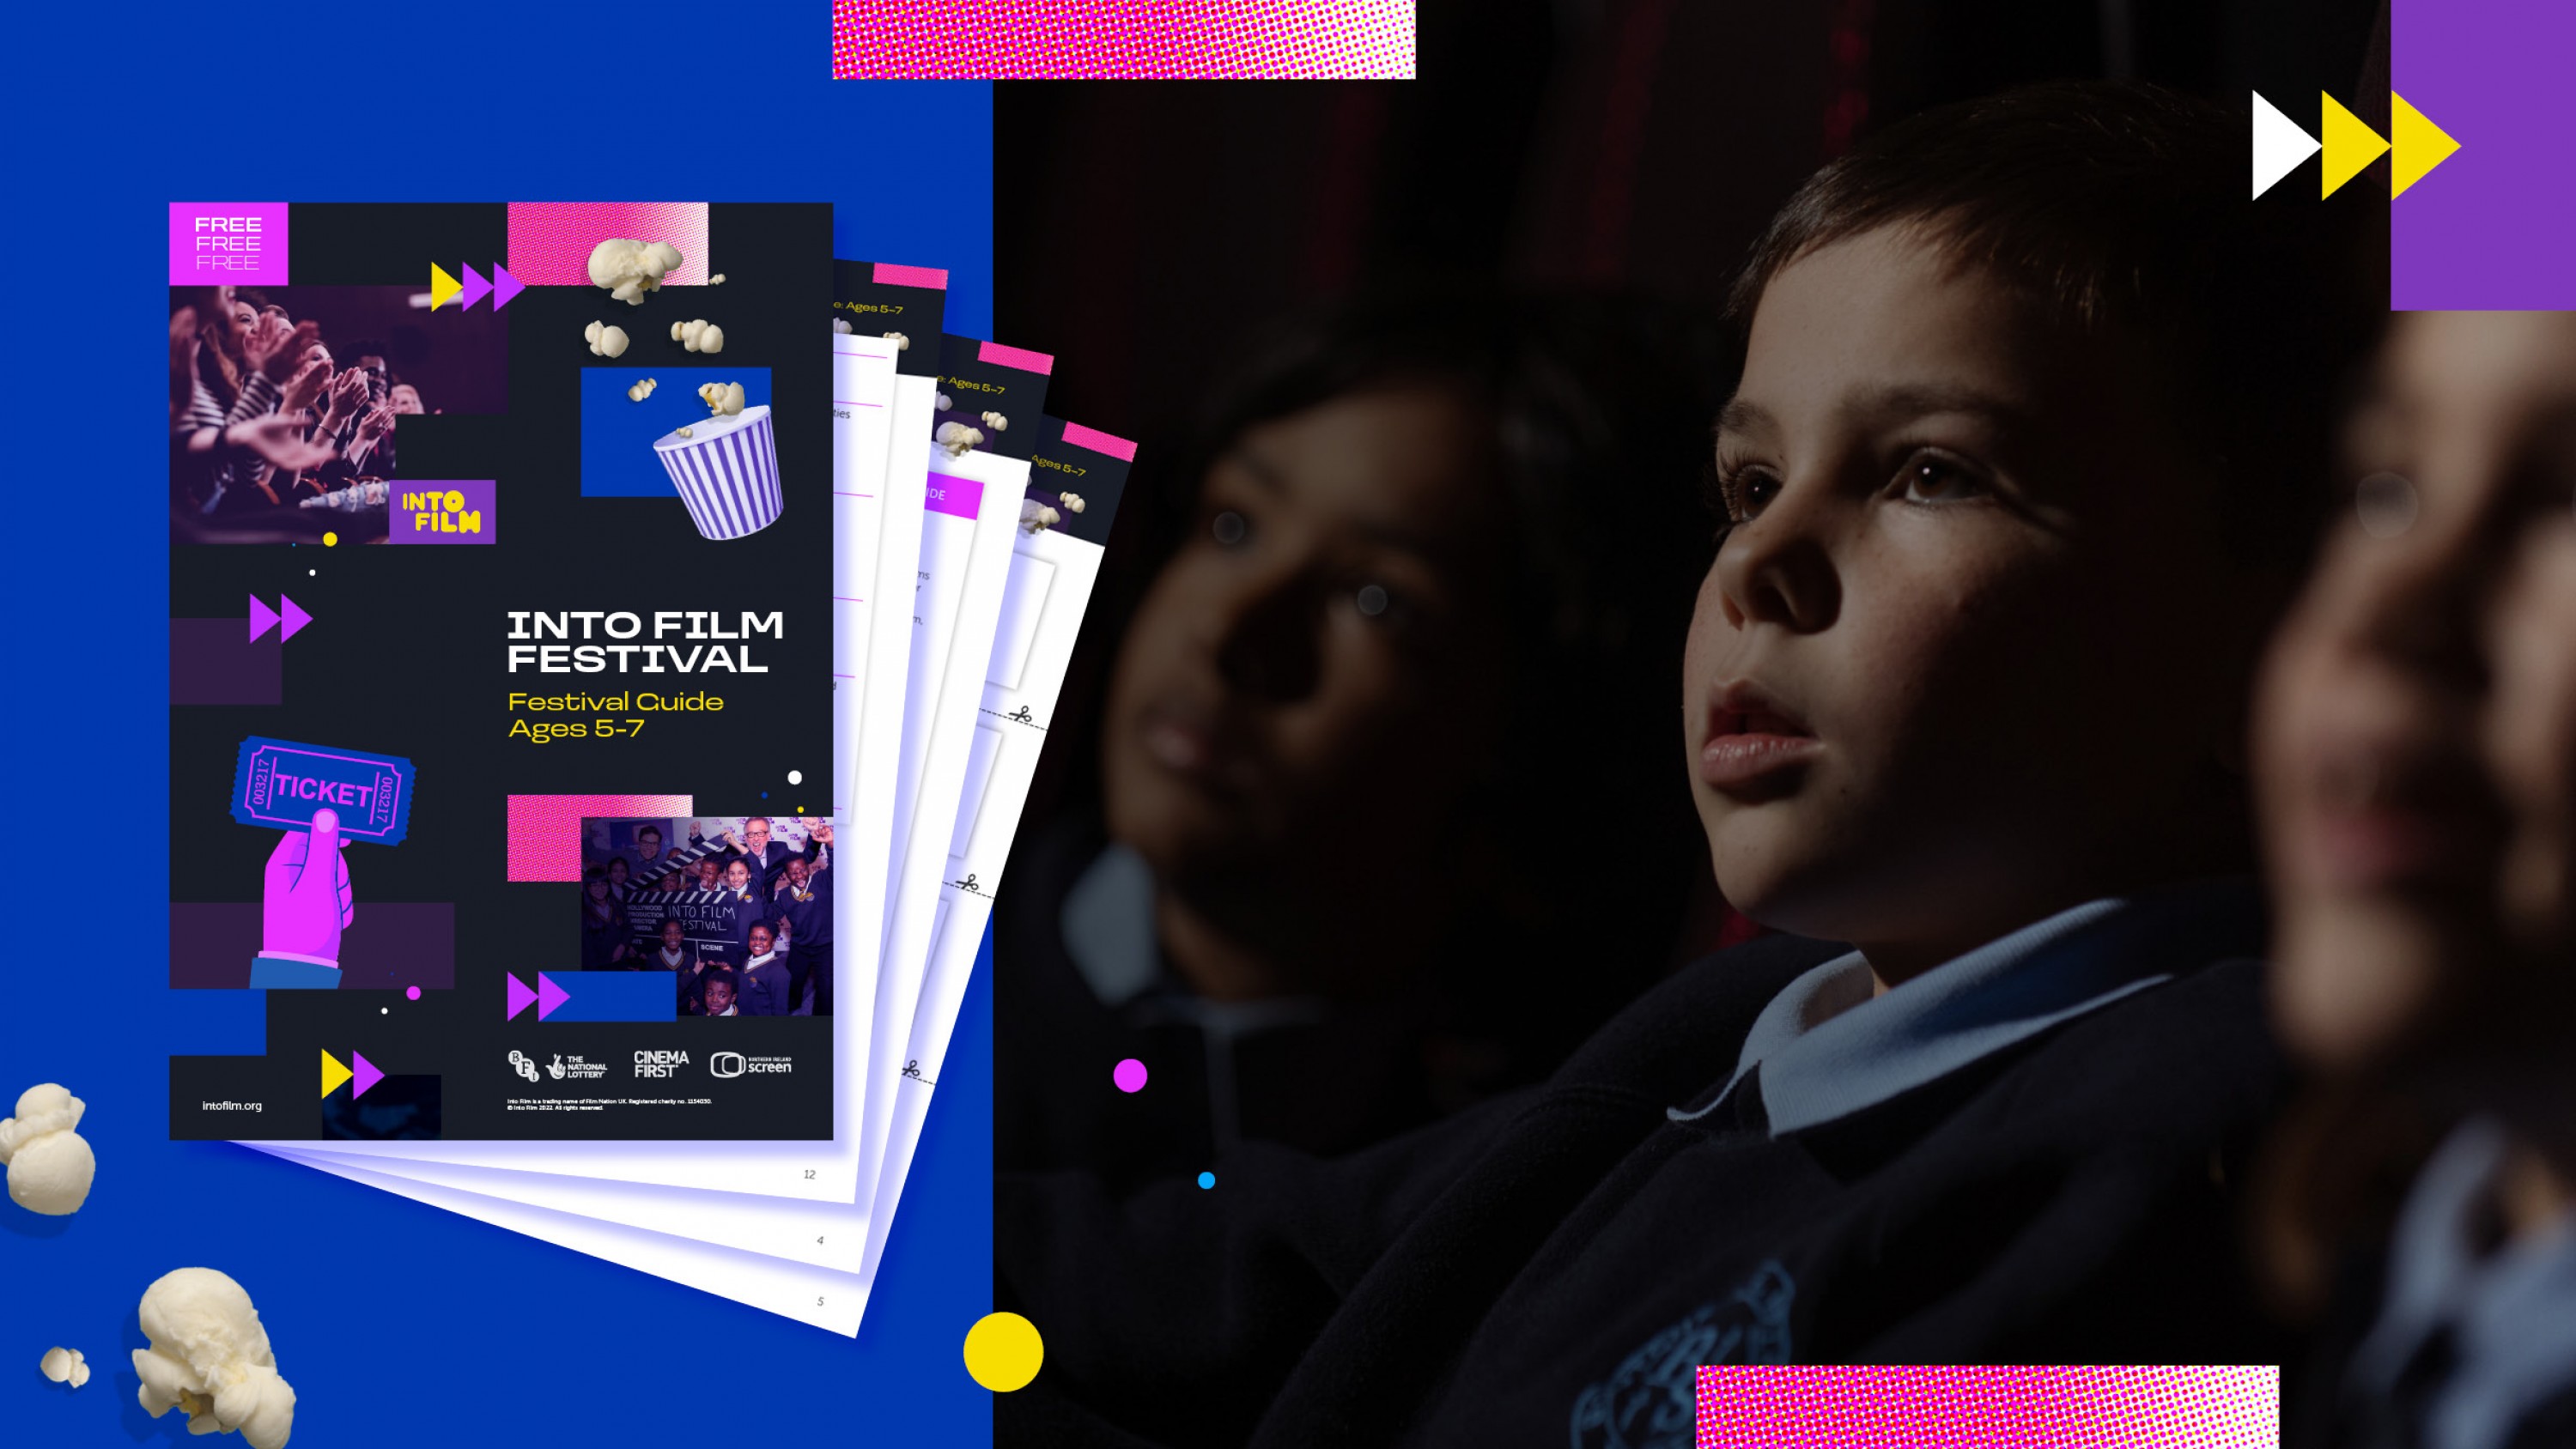 Guidance for attending the Into Film Festival with young people aged 5-7. t